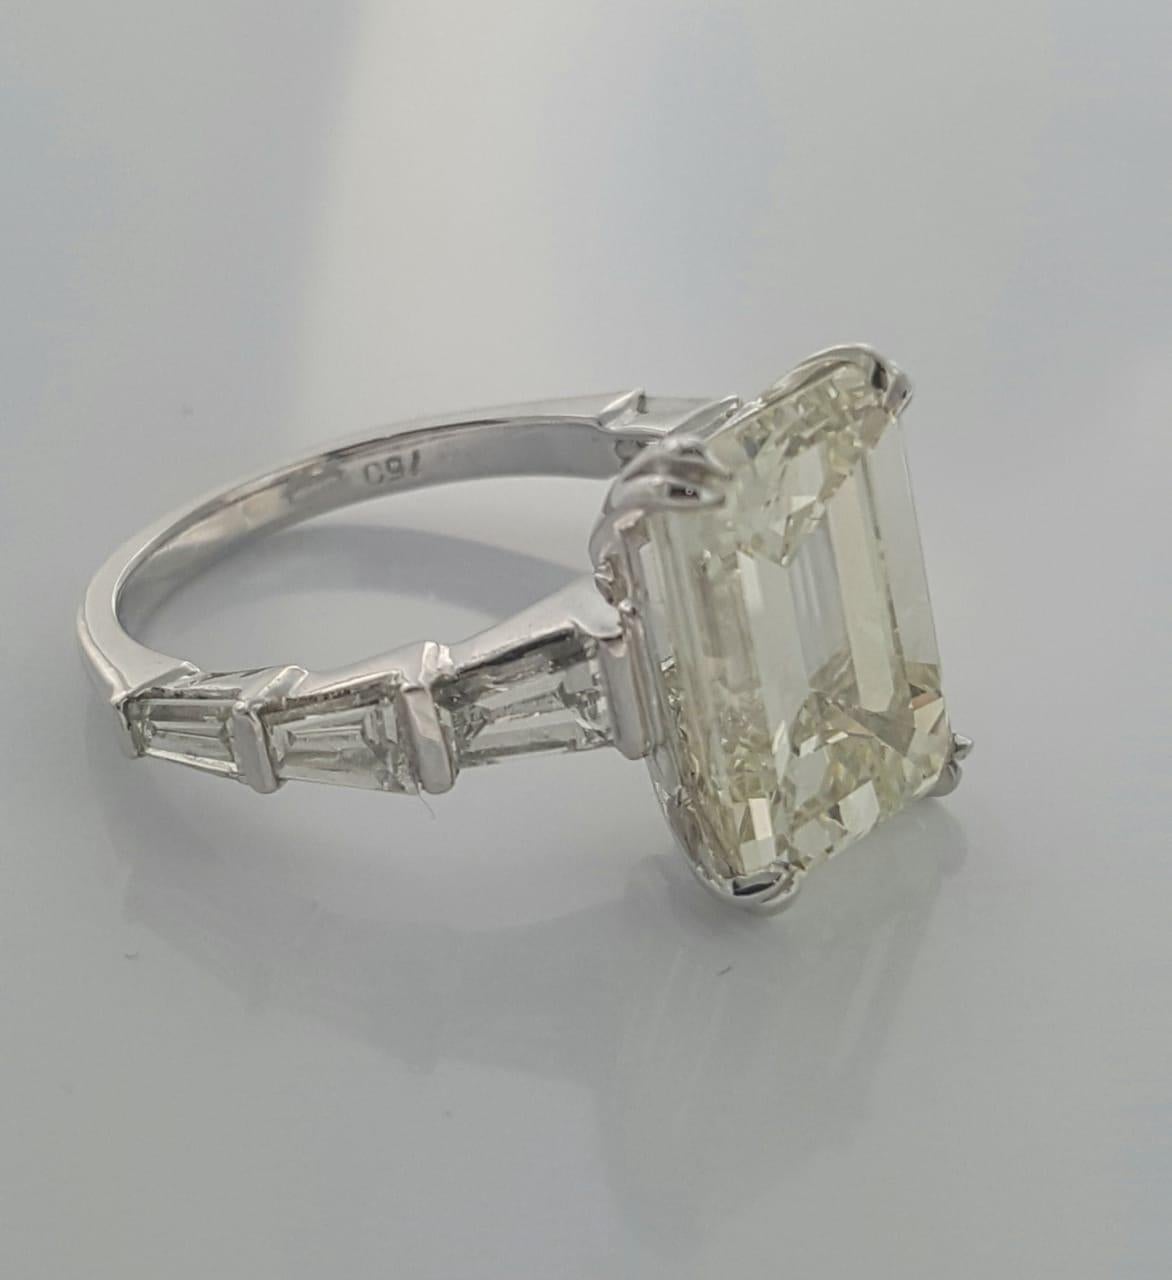 A truly gorgeous engagement ring designed and handcrafted in 18k gold  by Moguldiam Inc features 7.01 carat Emerald cut diamond with M color and SI 1 clarity and  is flanked by 6 white baguette diamonds , 3 on each side with VS clarity weighing a